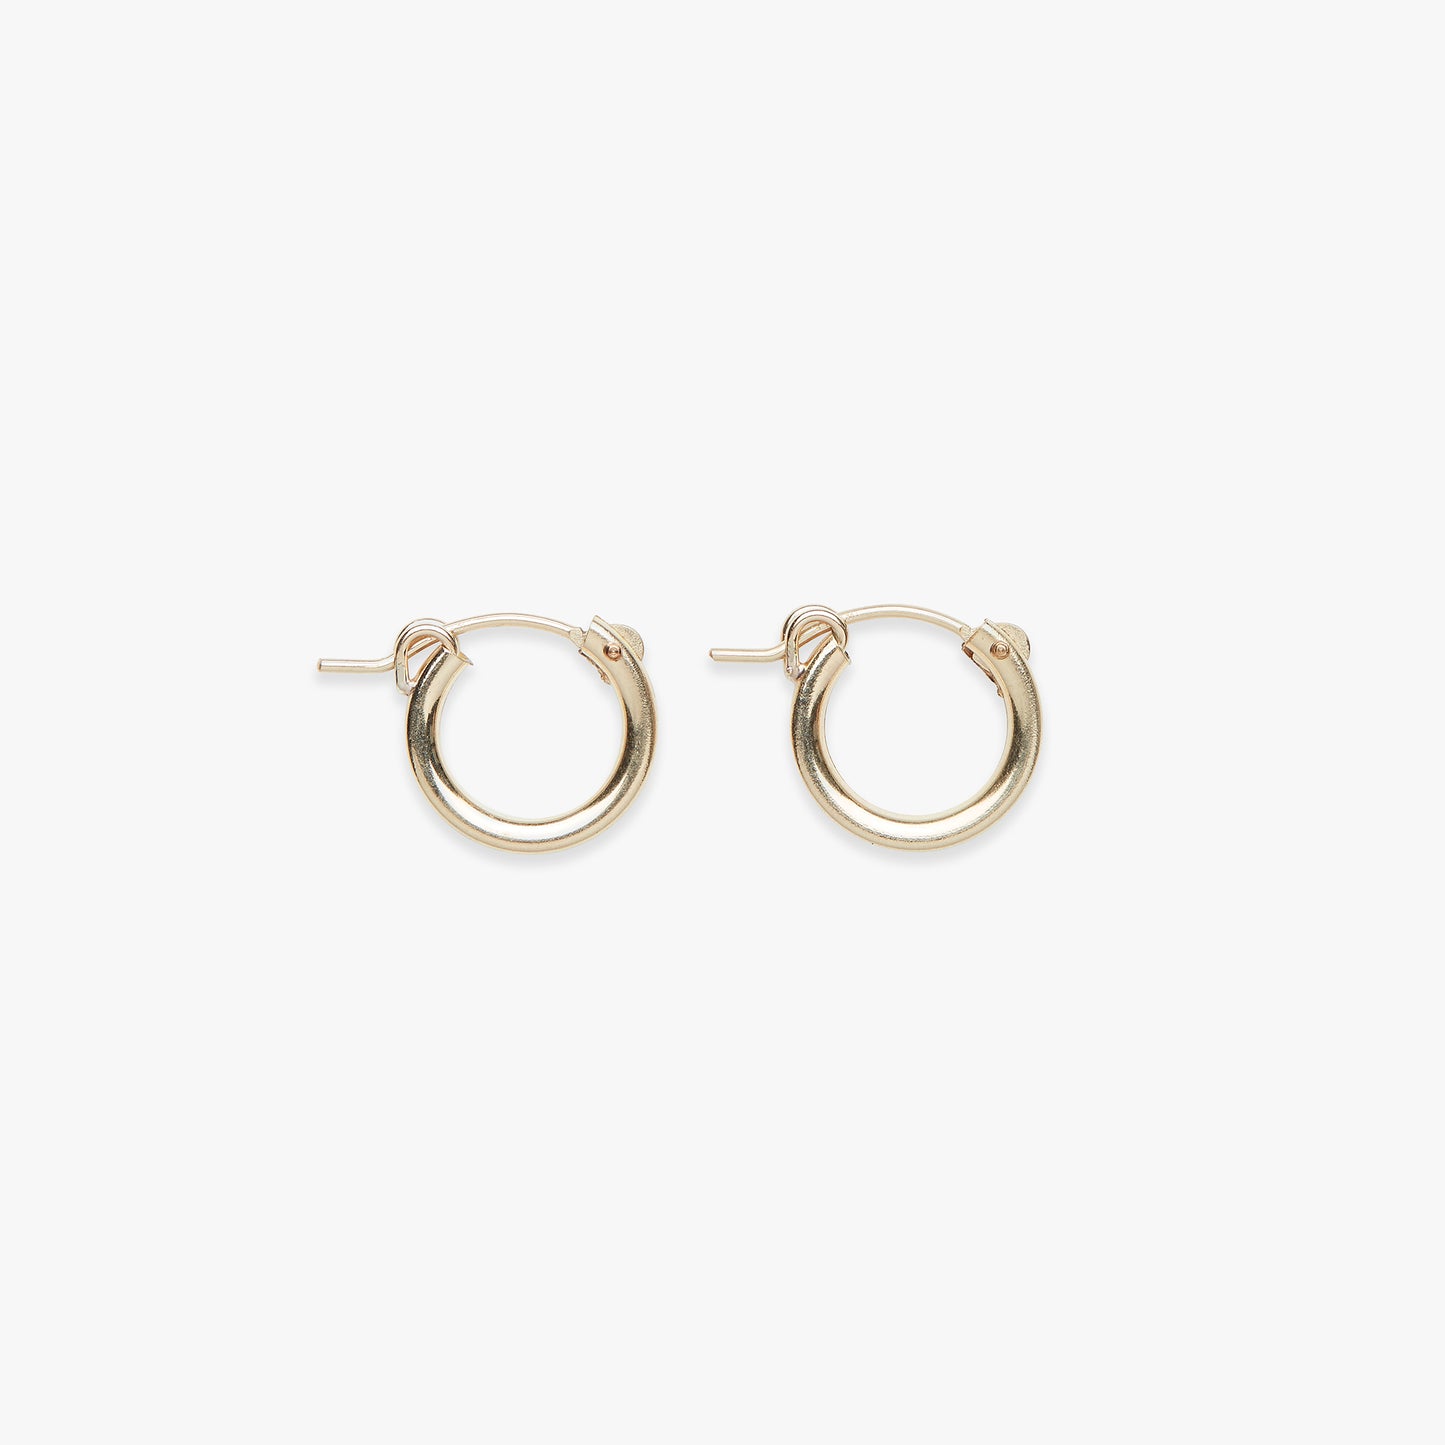 Thick earring with clasp gold filled